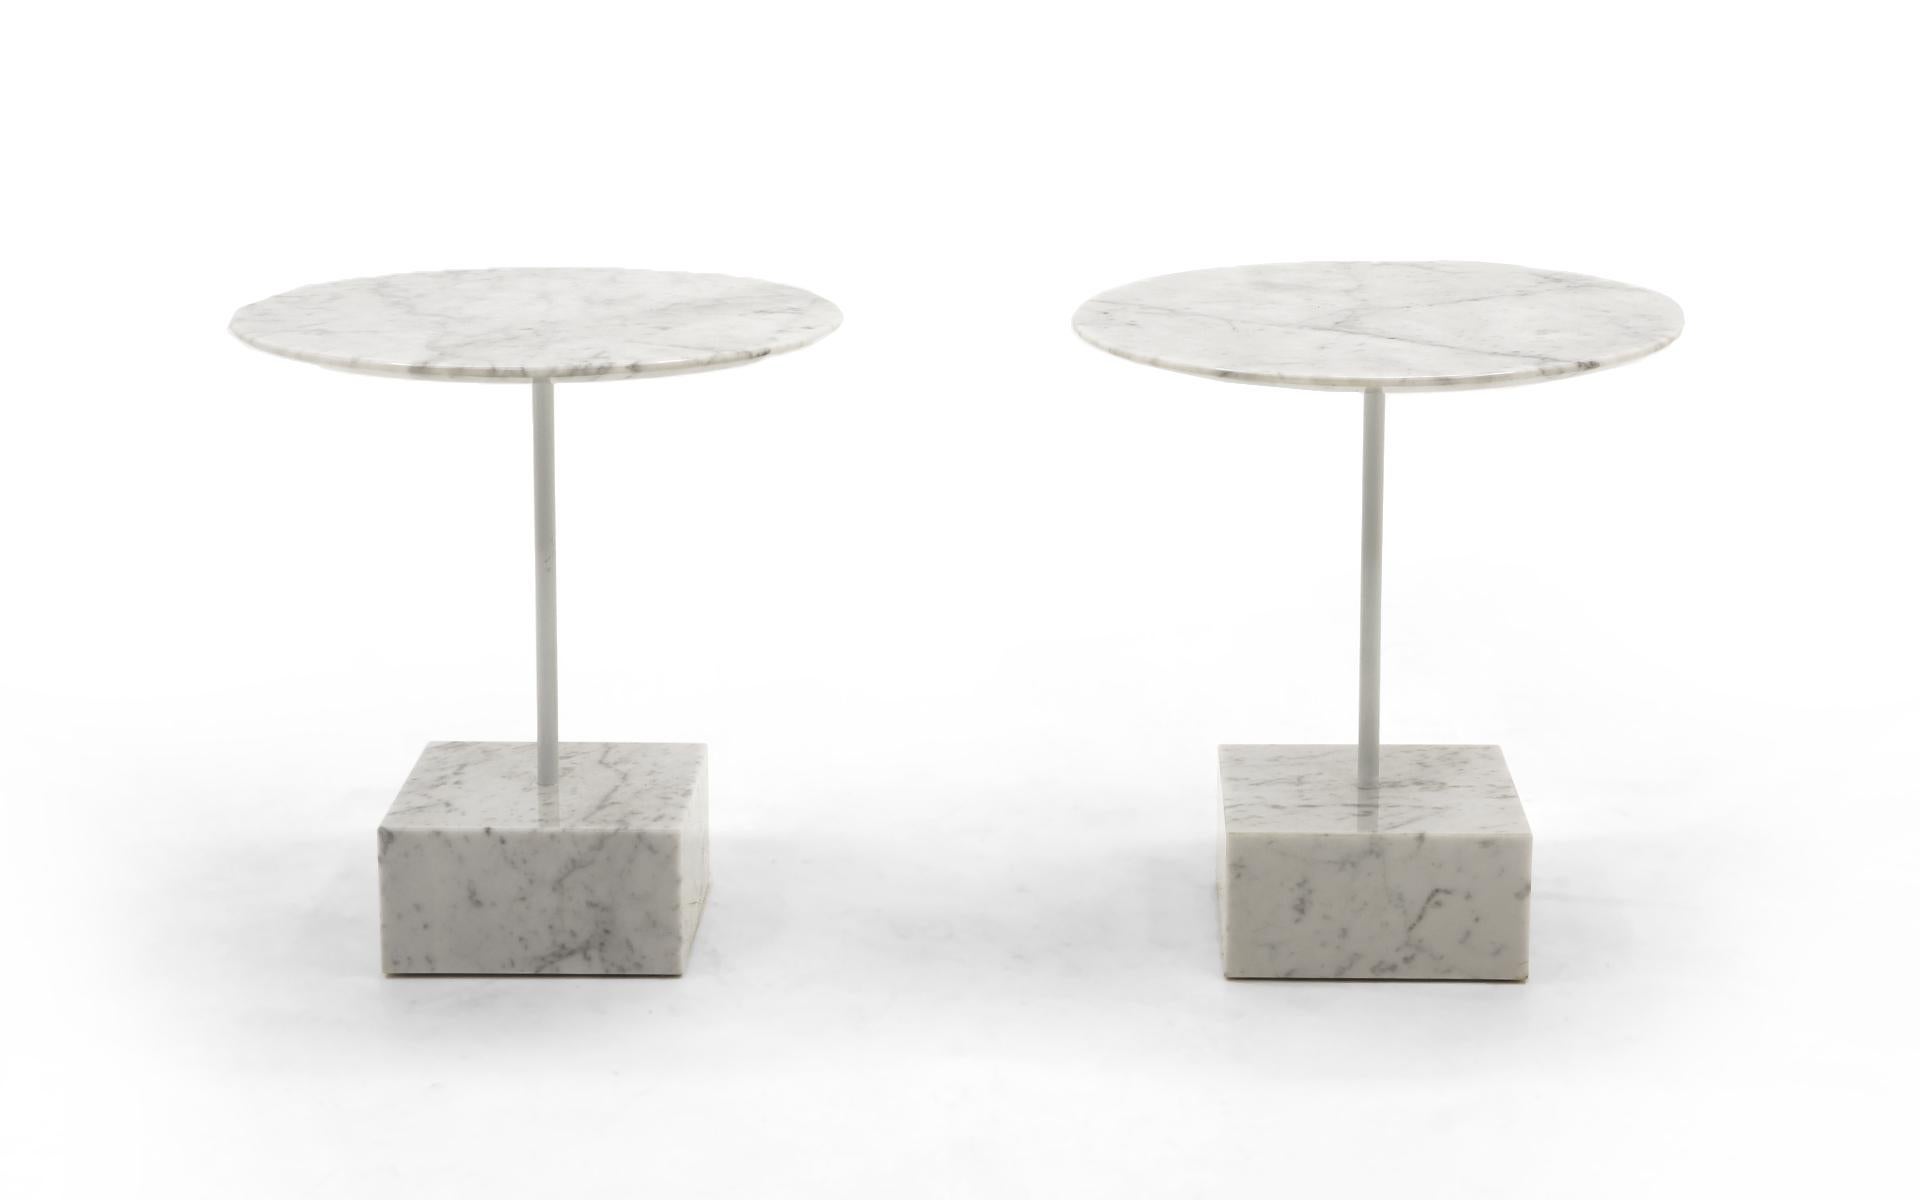 Pair of white marble side tables designed by Memphis Milano founder, Ettore Sottsass for Ultime Edizioni, Italy, 1990. Heavy square marble bases with beautifully beveled round marble tops. A lacquered steel support connects the top to the base. Very